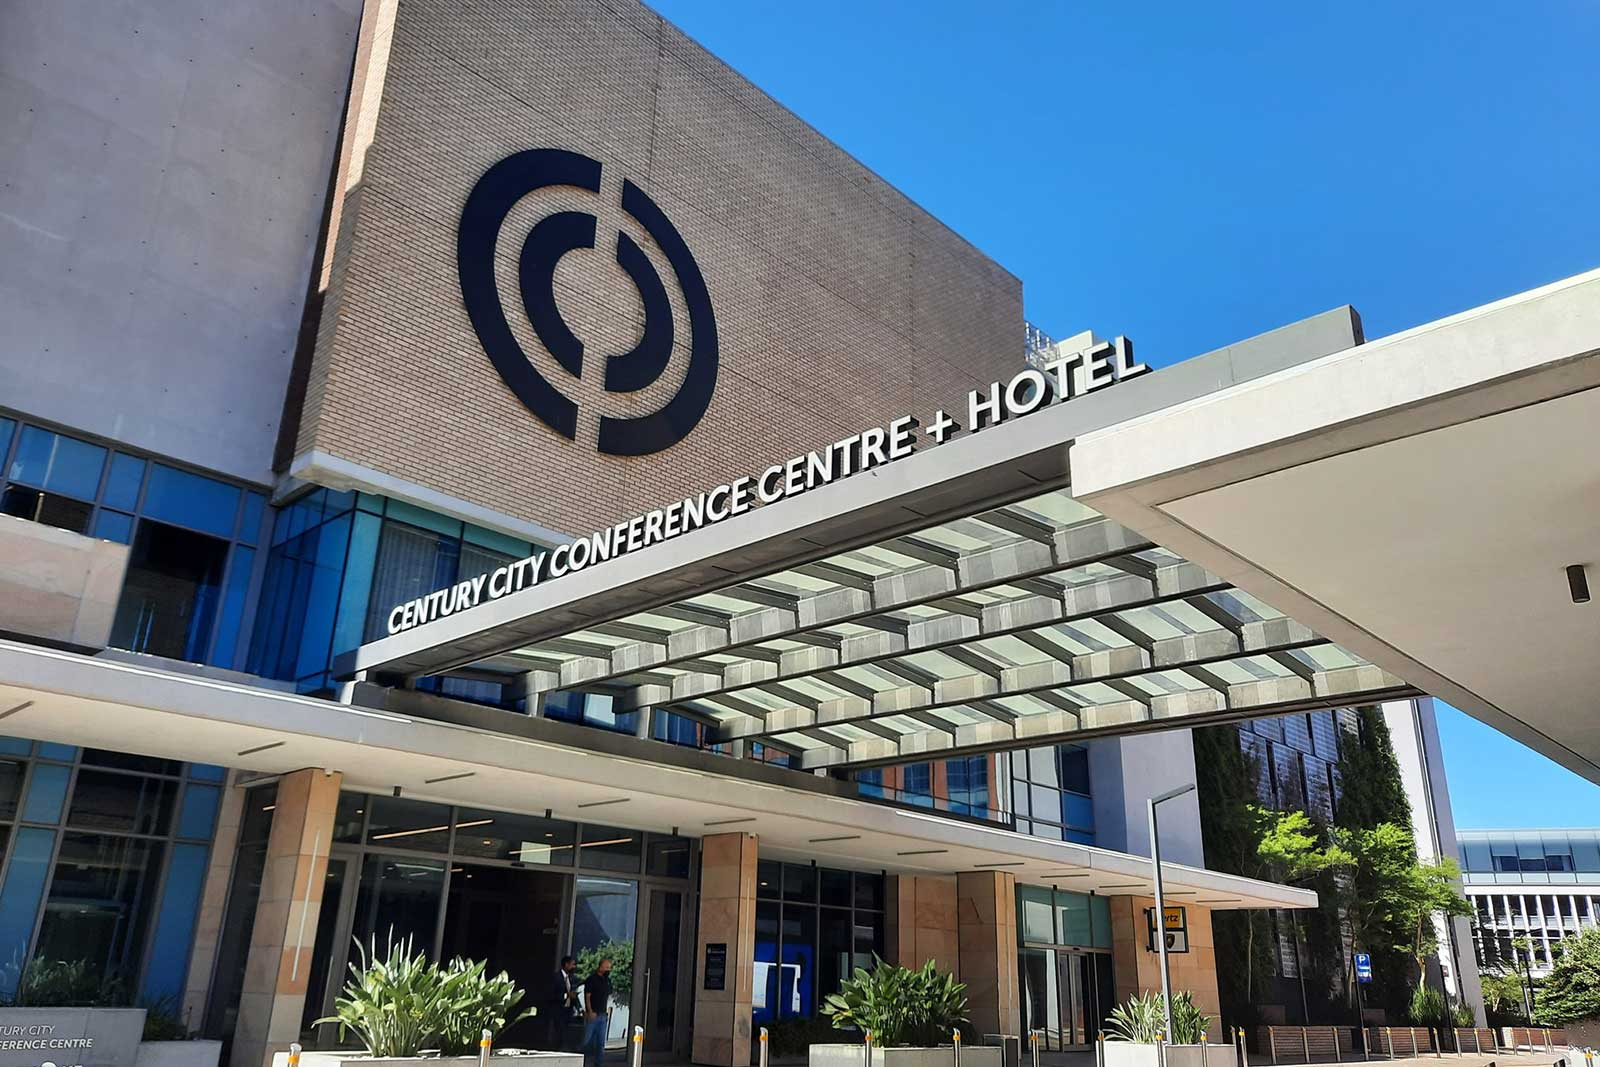 #PODCAST Century City Conference Centre and Hotels bursary "a gateway into the local and international hospitality industry" #sabcnews